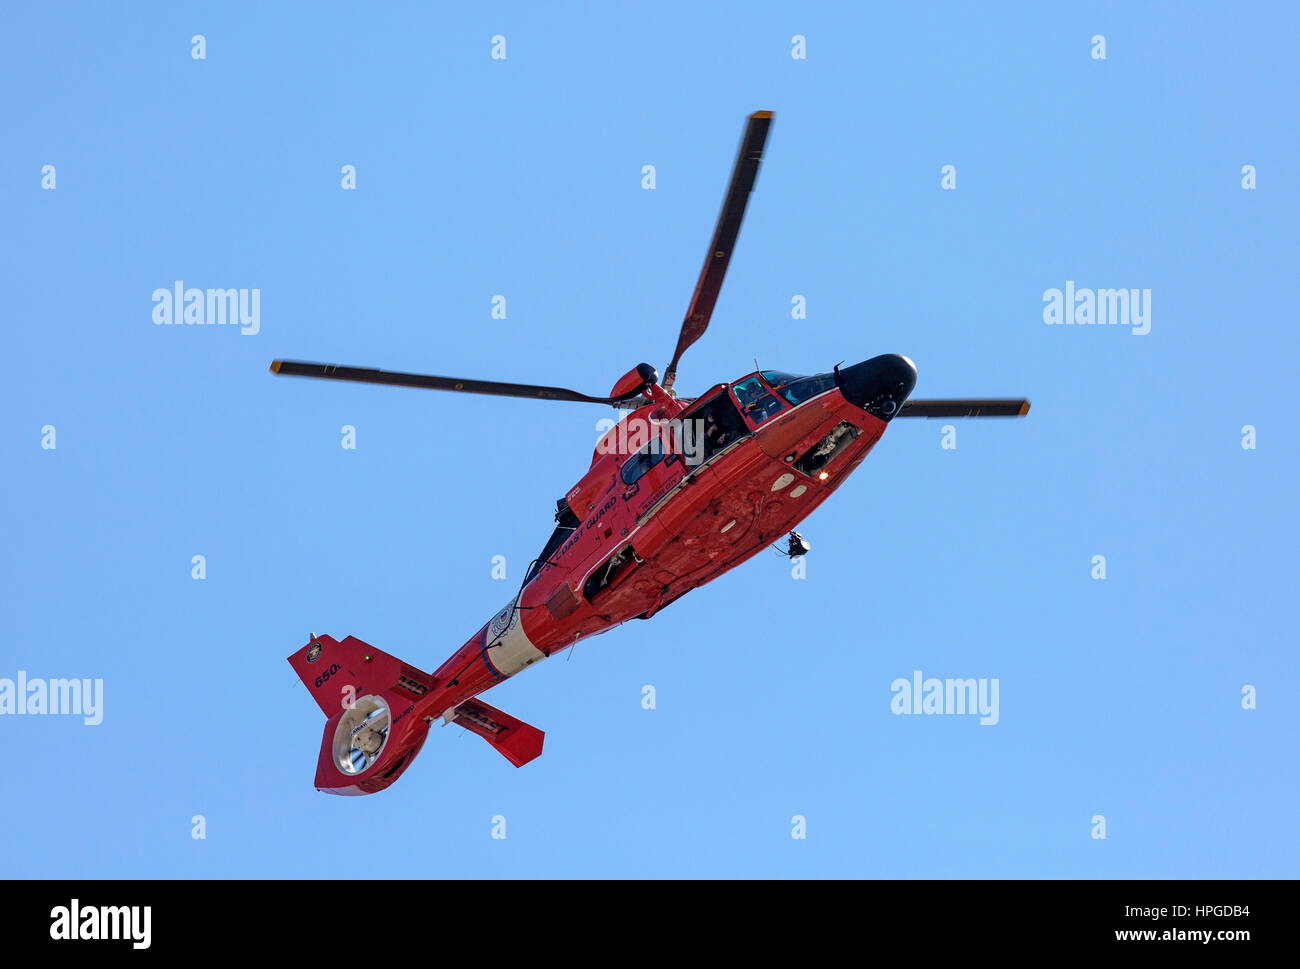 MH-65 Dolphin helicopter from the United States Coast Guard. Stock Photo